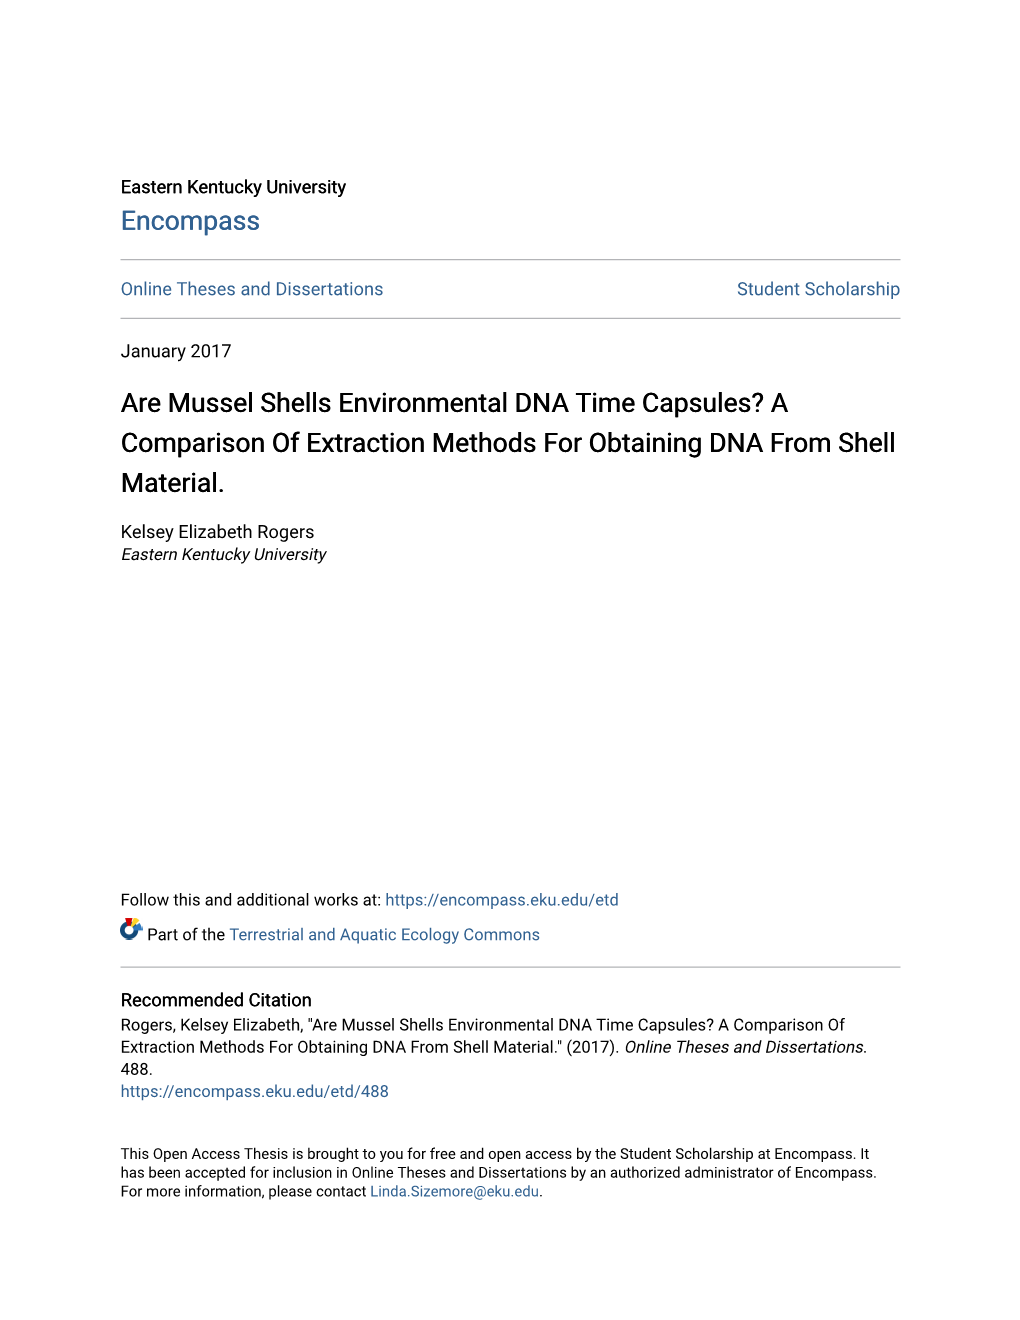 Are Mussel Shells Environmental DNA Time Capsules? a Comparison of Extraction Methods for Obtaining DNA from Shell Material